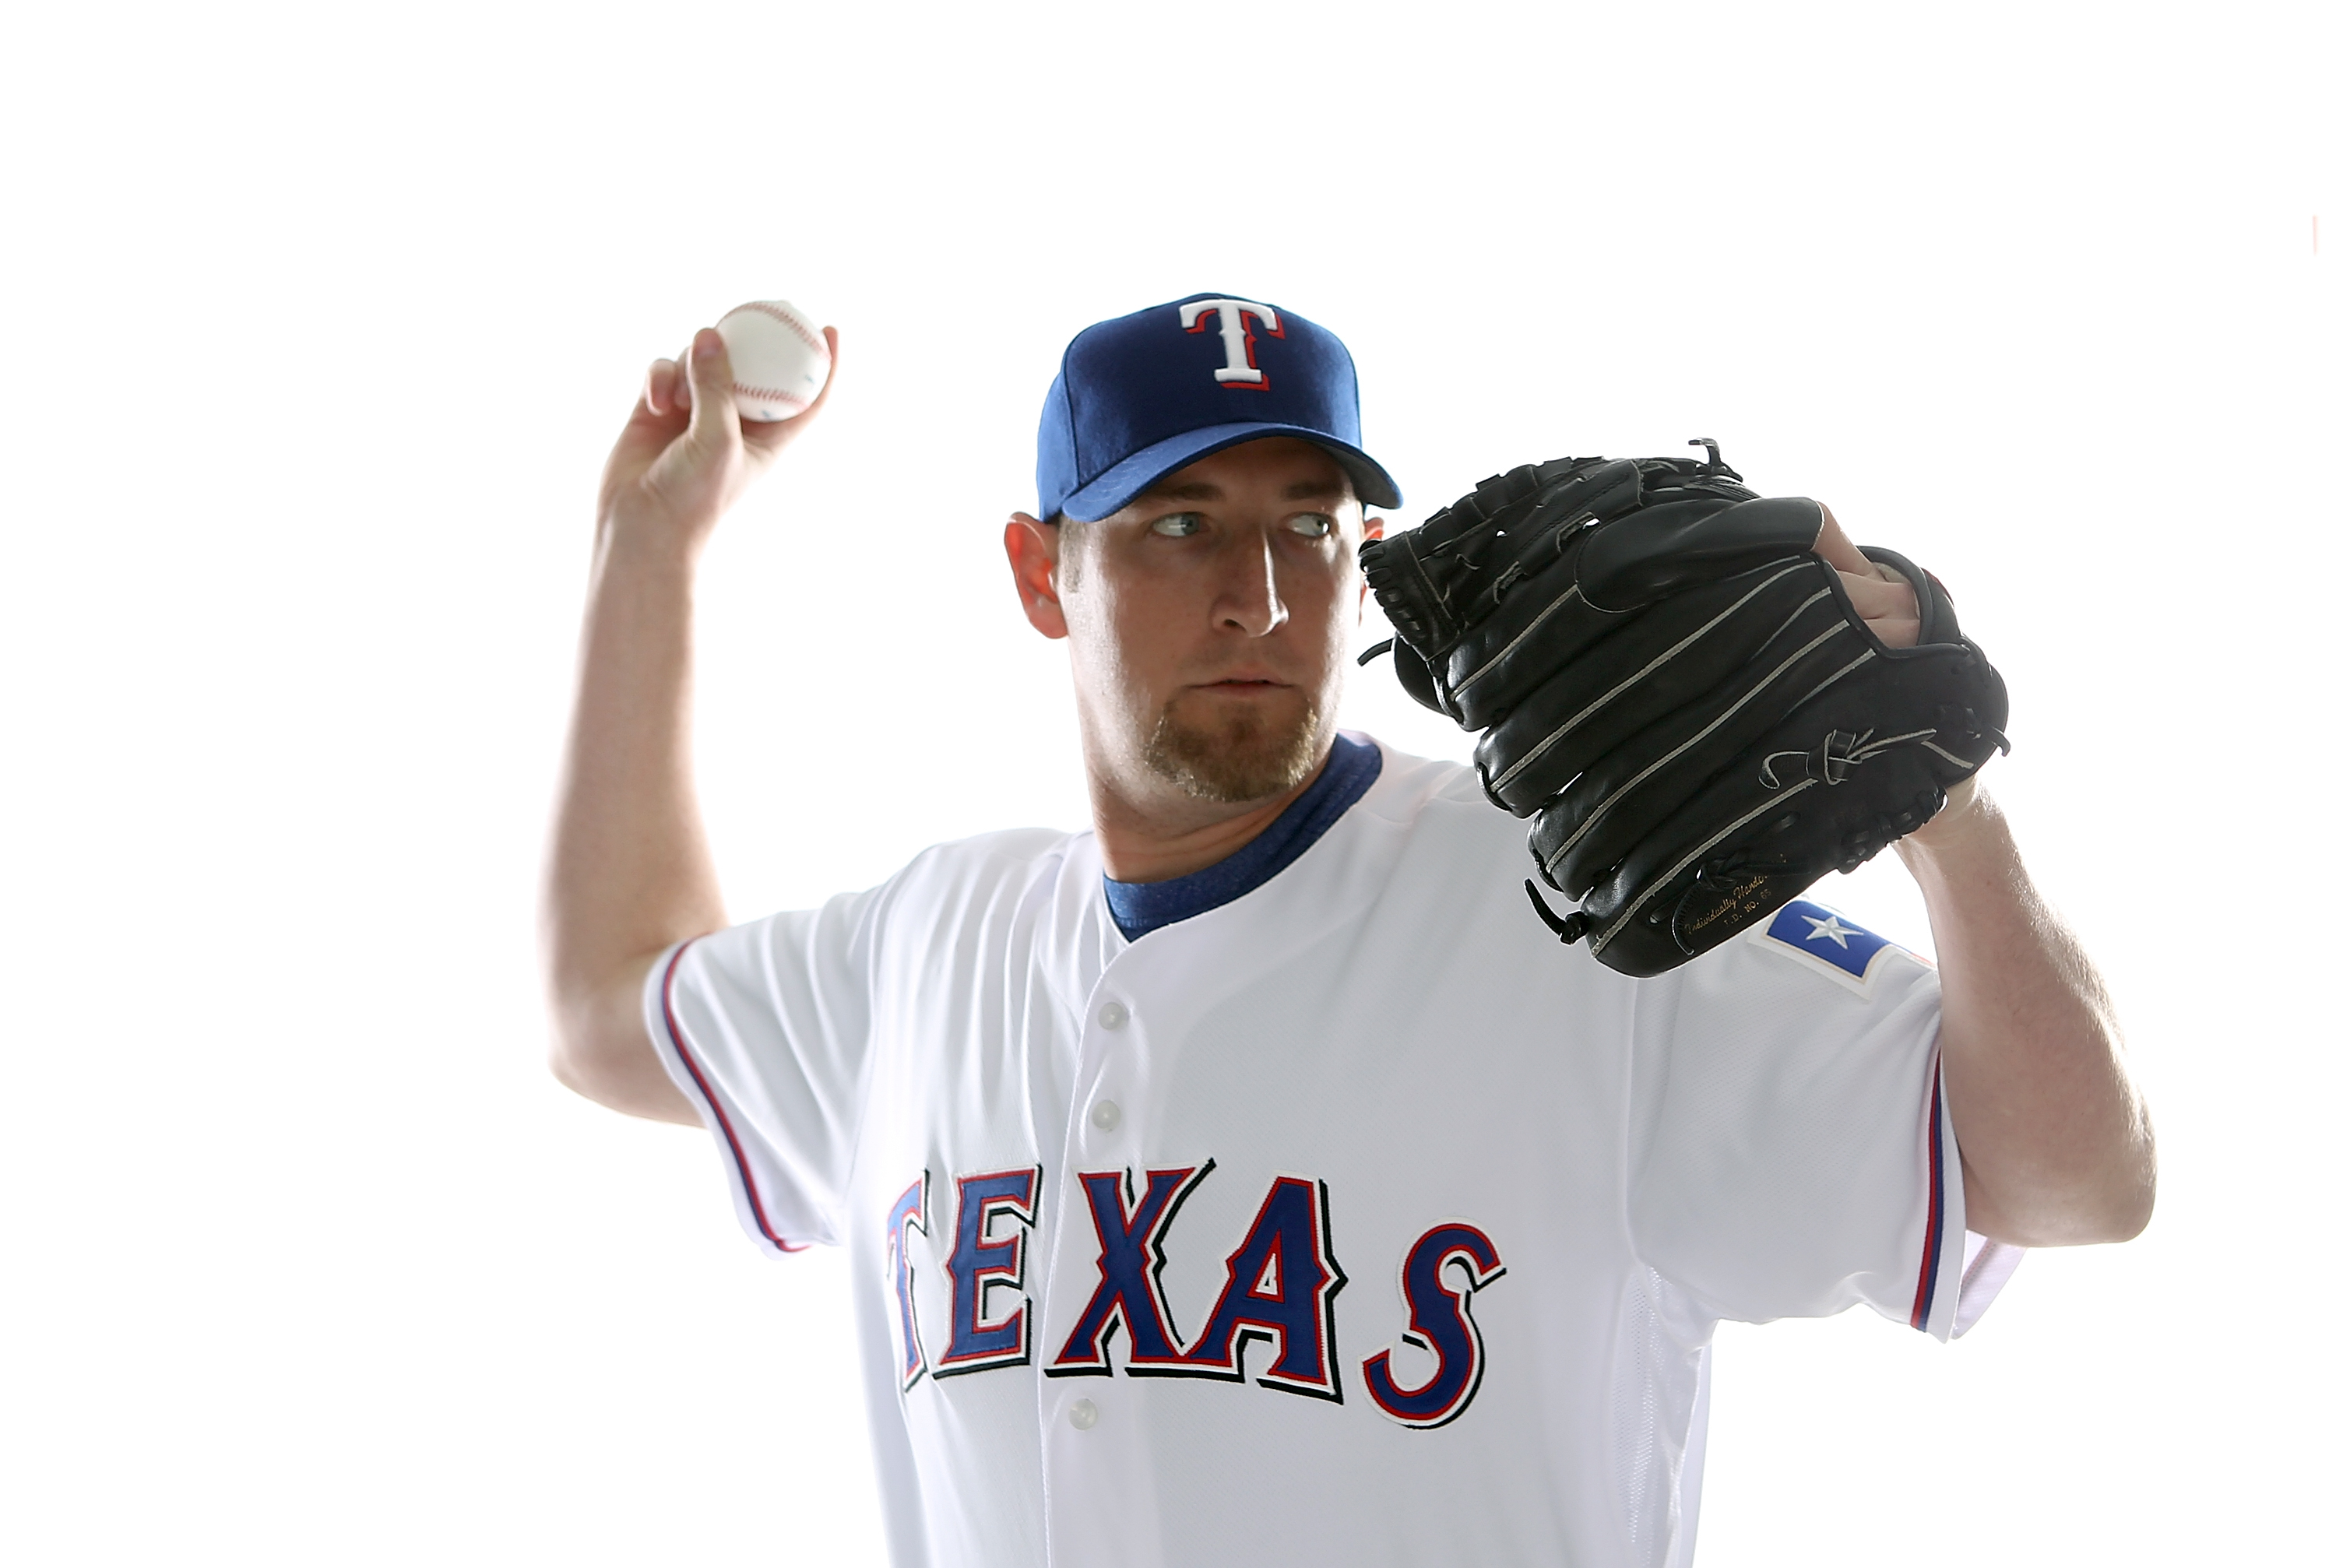 SURPRISE, AZ - FEBRUARY 25:  Brandon Webb #33 of the Texas Rangers poses for a portrait during Spring Training Media Day on February 25, 2011 at Surprise Stadium in Surprise, Arizona.  (Photo by Jonathan Ferrey/Getty Images)